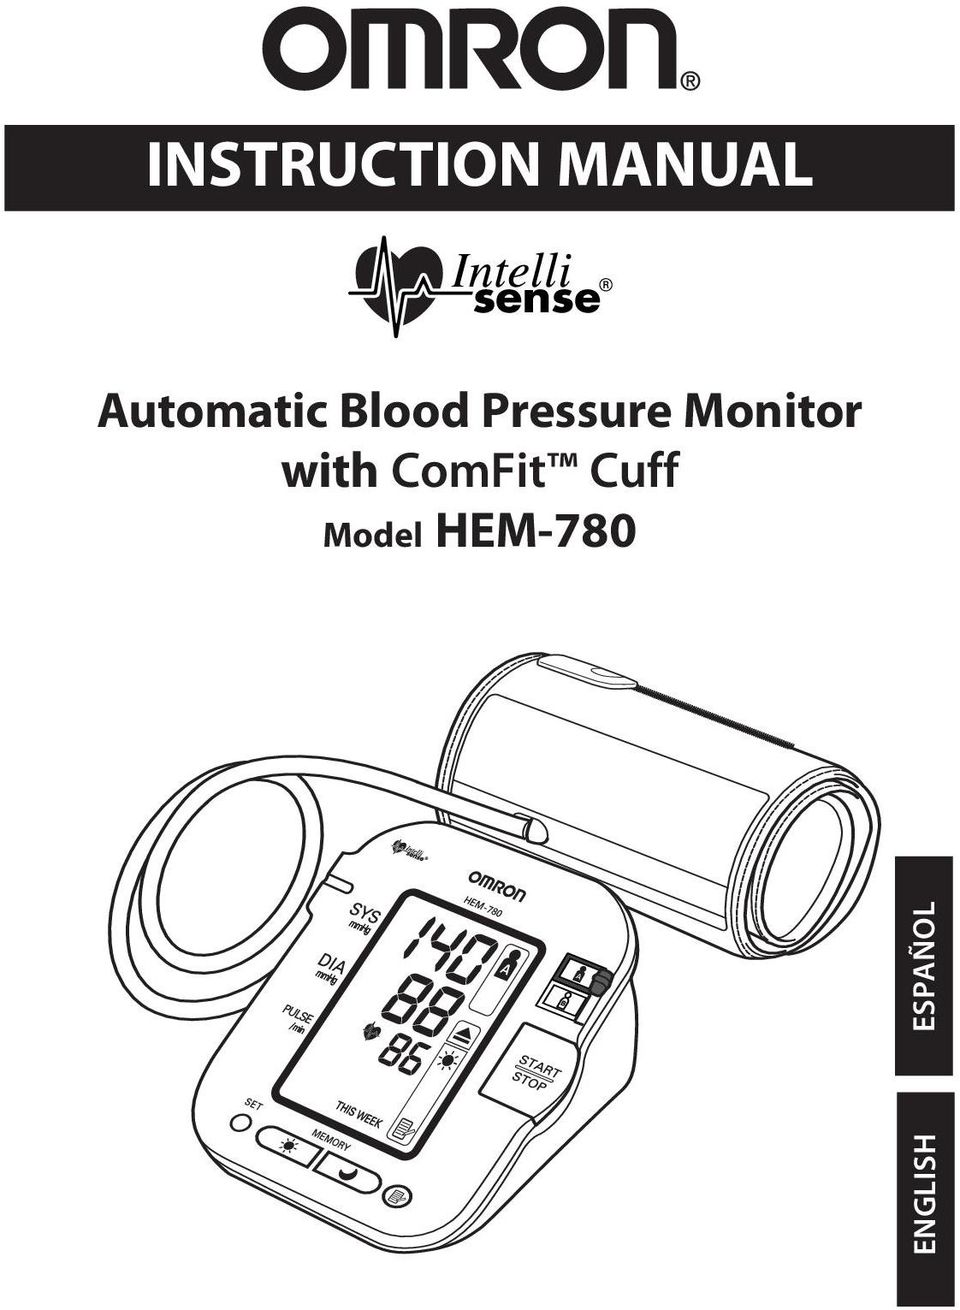 Monitor with ComFit Cuff